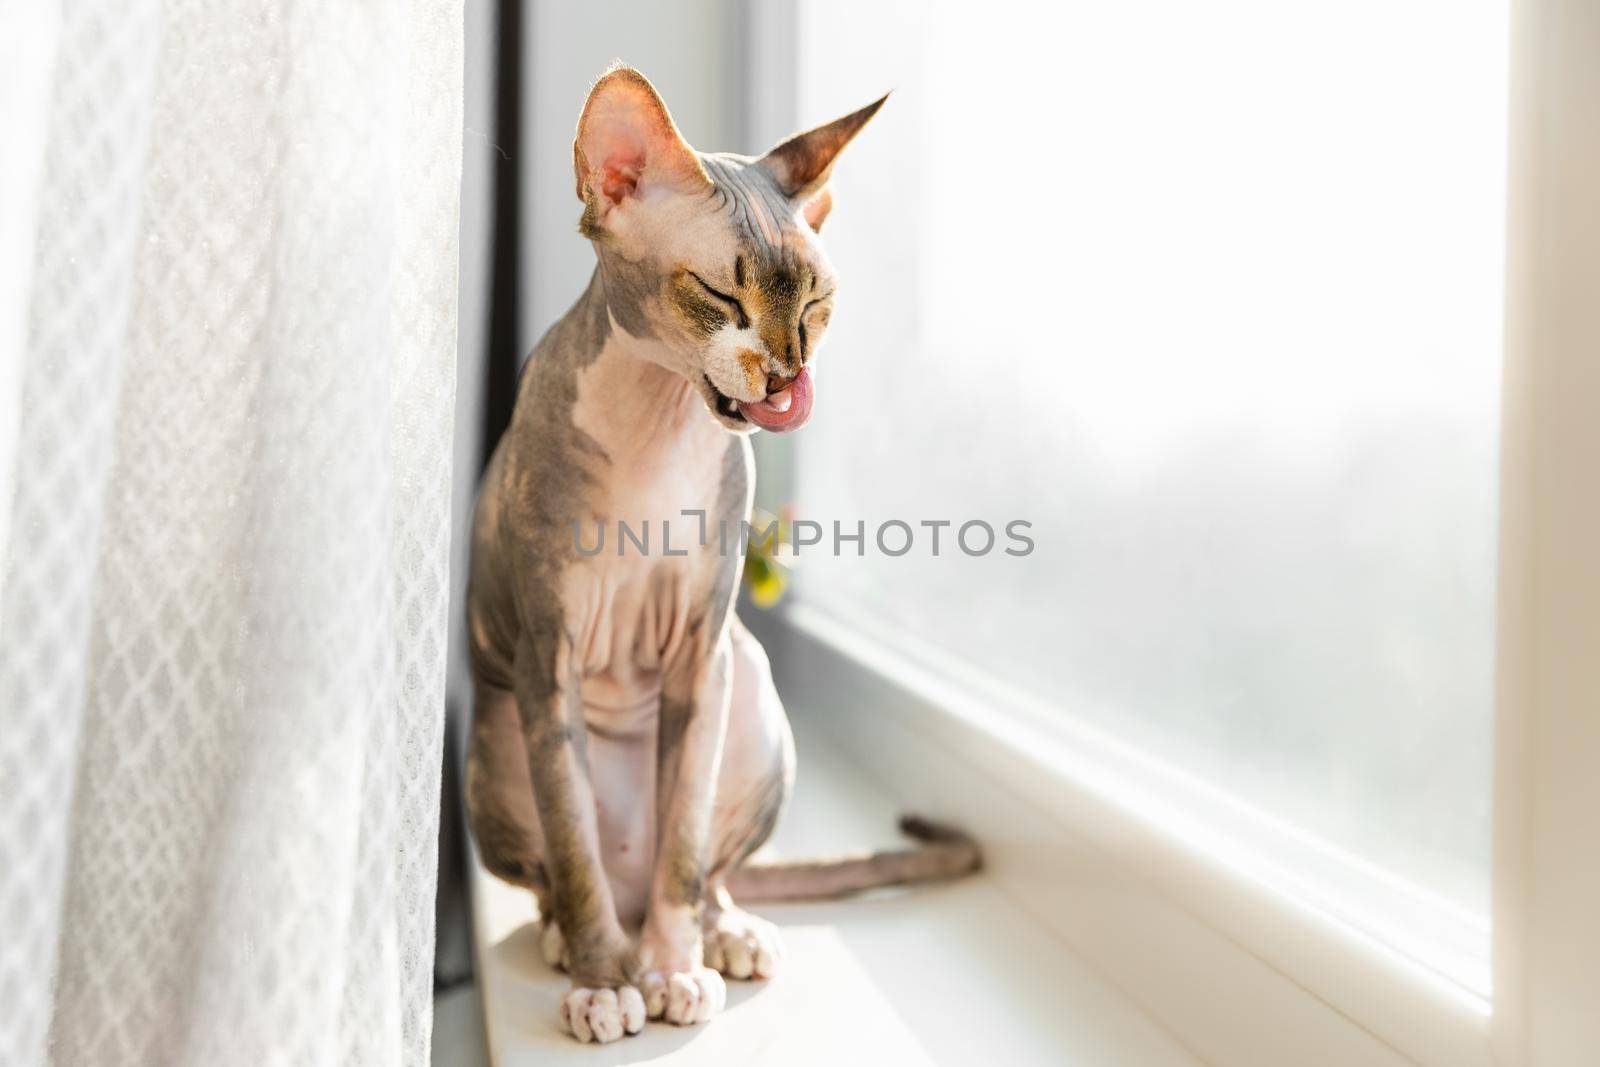 Cat grooming himself cleaning his paw while resting on window sill. Sphinx cat. Cat's tongue by Marina-A